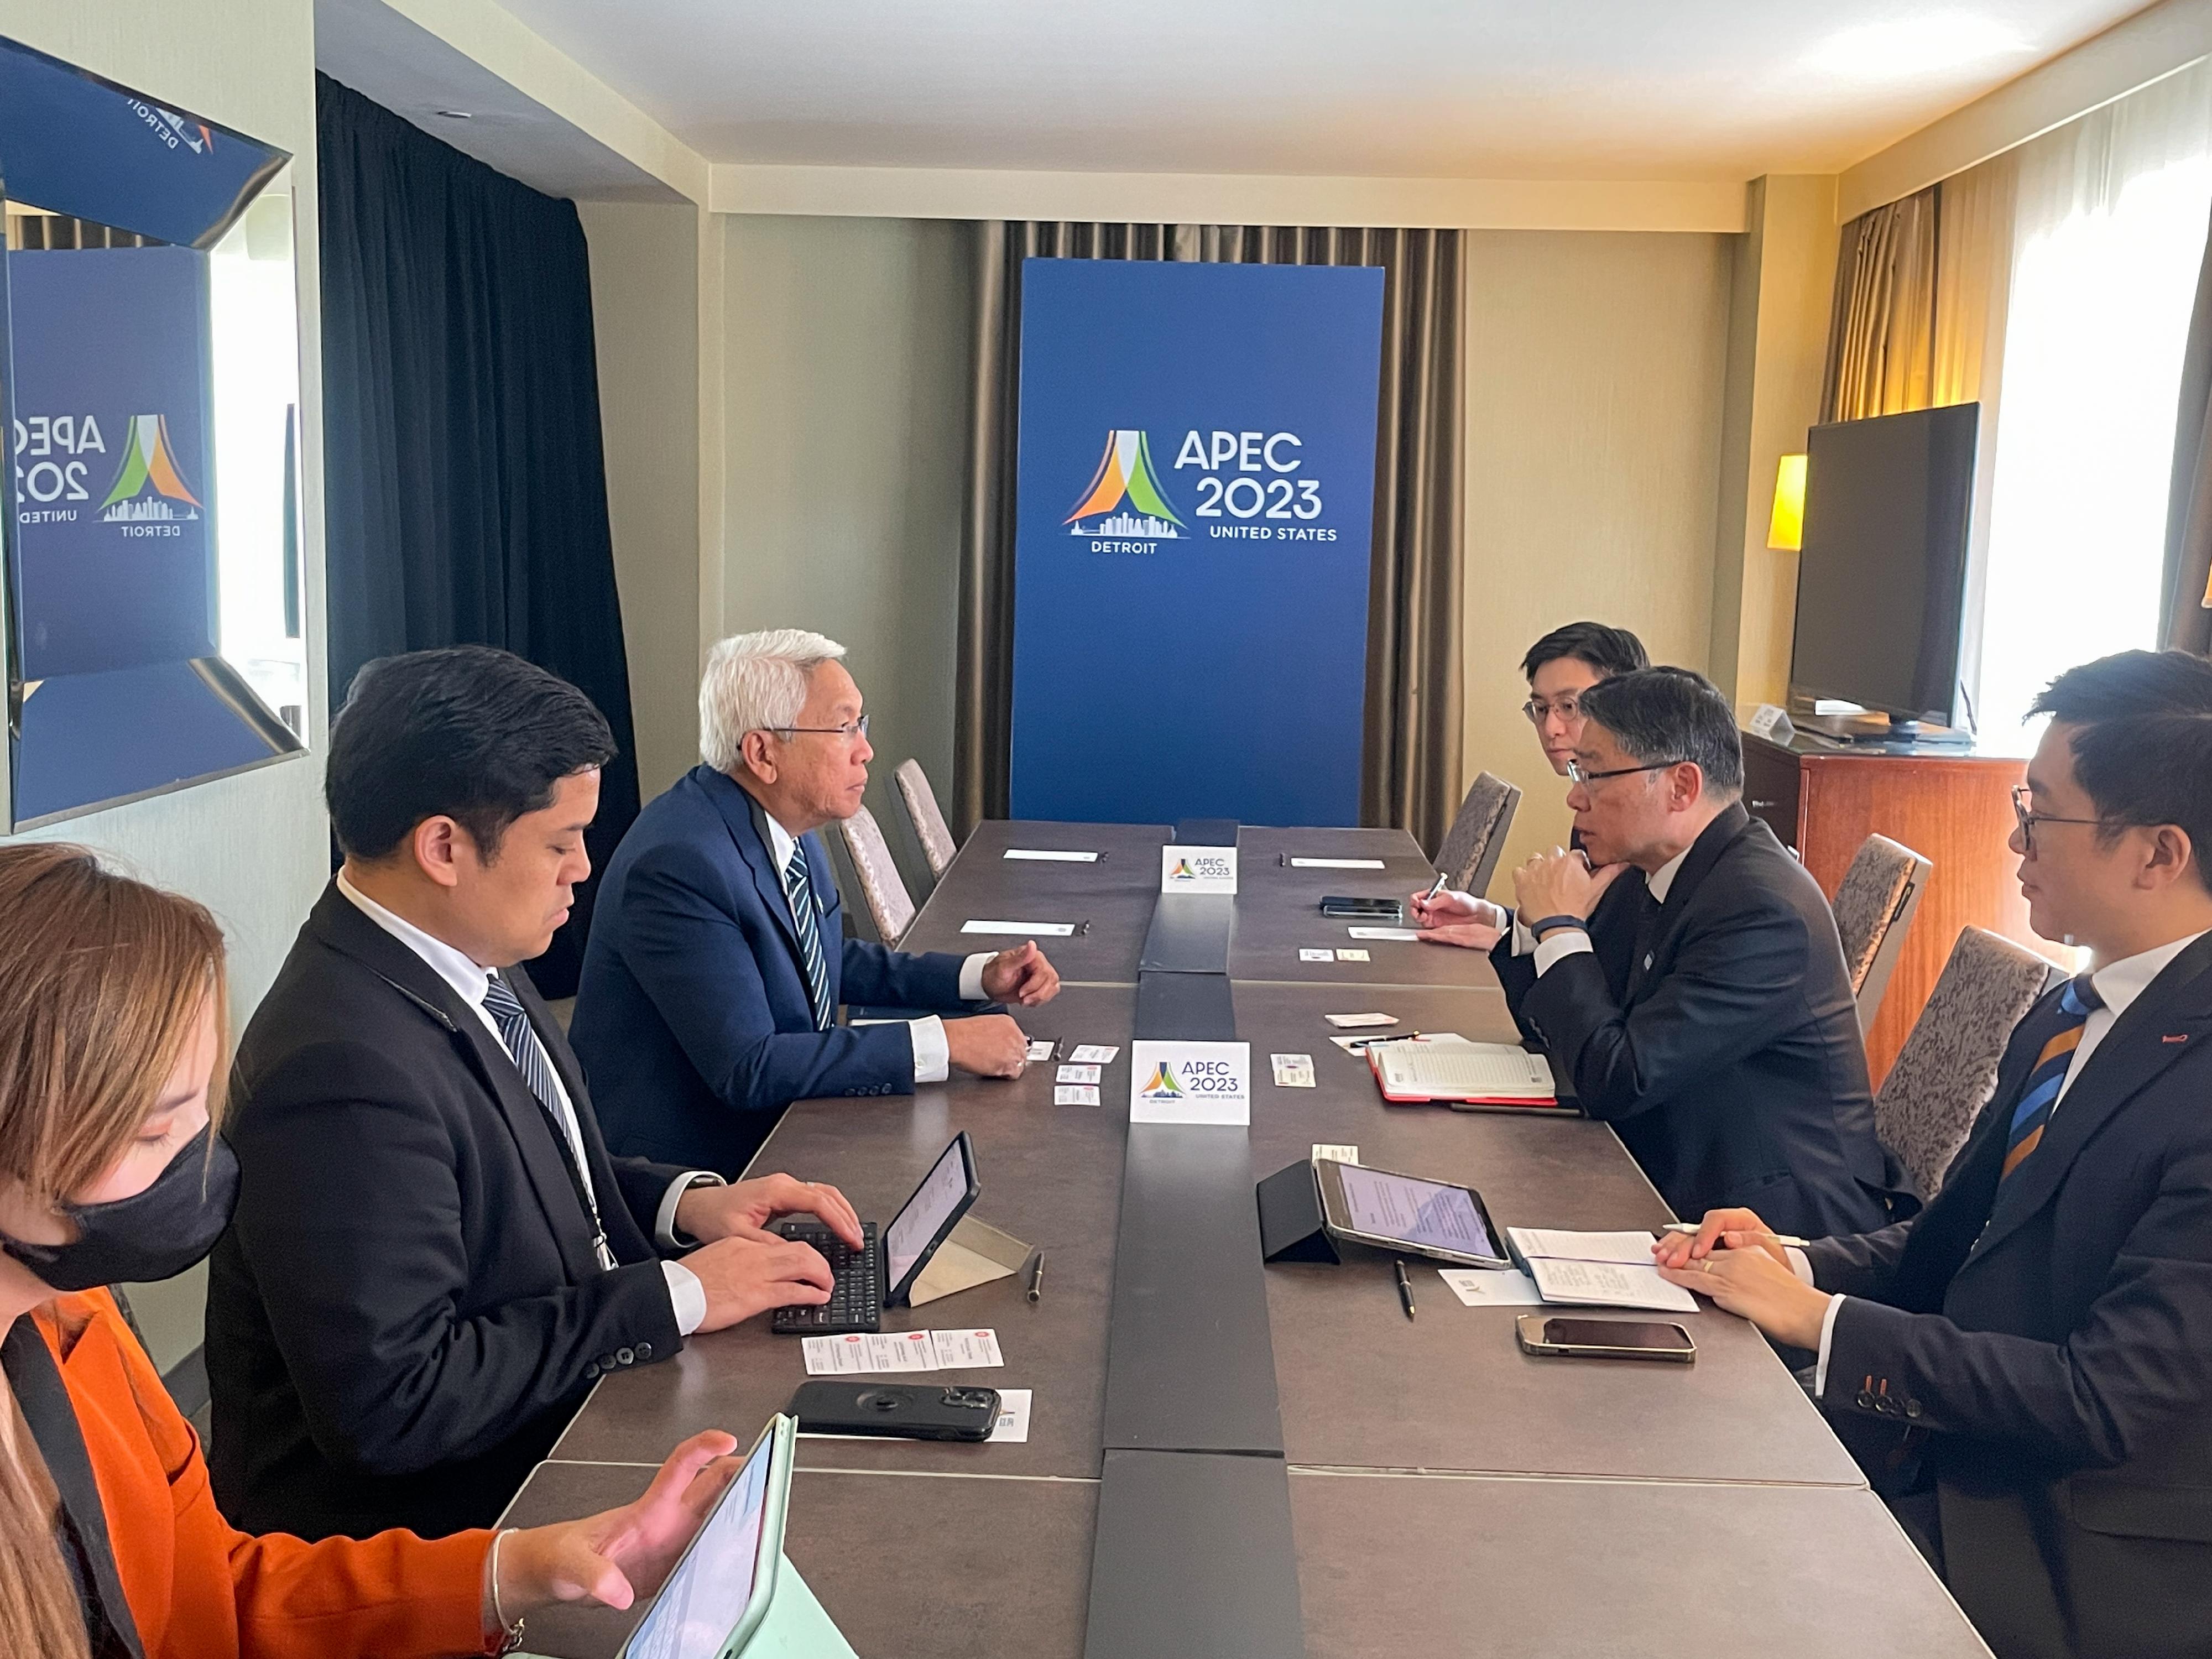 The Secretary for Transport and Logistics, Mr Lam Sai-hung (second right), met with the Undersecretary for the Maritime Sector of the Department of Transportation of the Philippines, Mr Elmer Francisco Sarmiento (third left), on the sidelines of the 11th Asia-Pacific Economic Cooperation Transportation Ministerial Meeting in Detroit, the United States (US), yesterday (May 15, US time) to exchange views on bilateral issues of mutual concern.